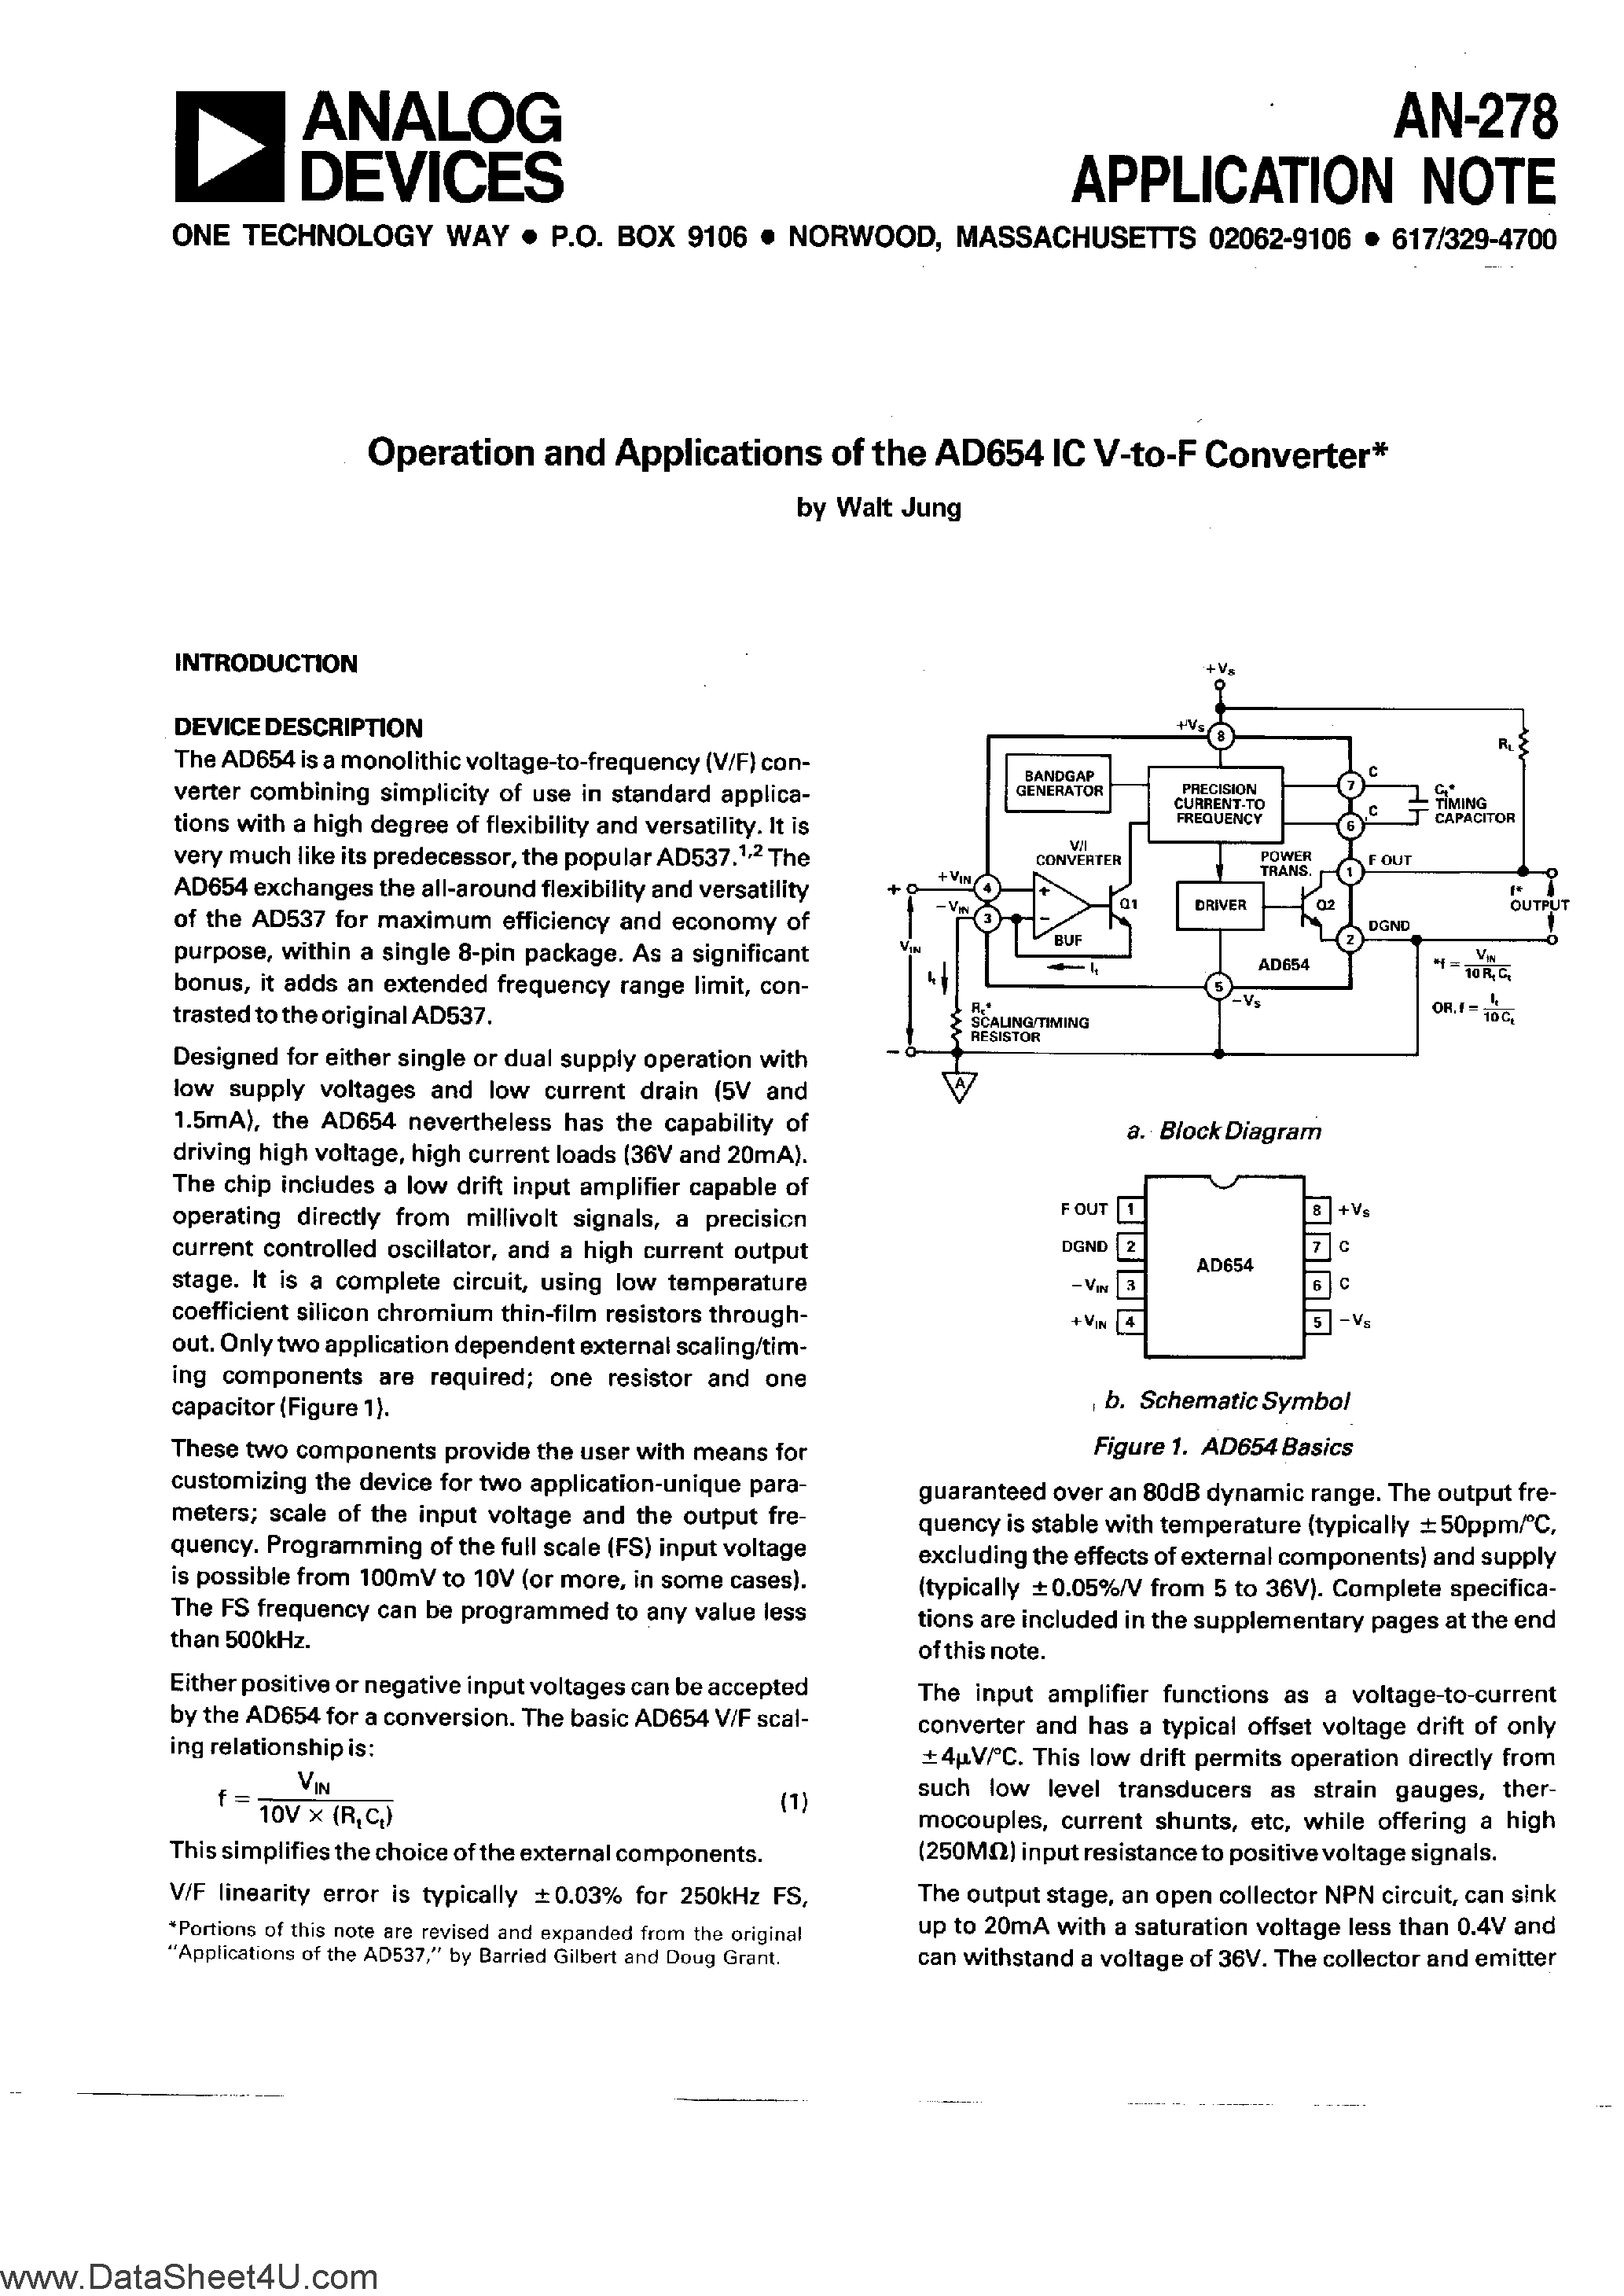 Даташит AN-278 - Operation and Applications of the AD654 IC V to F Converter страница 1